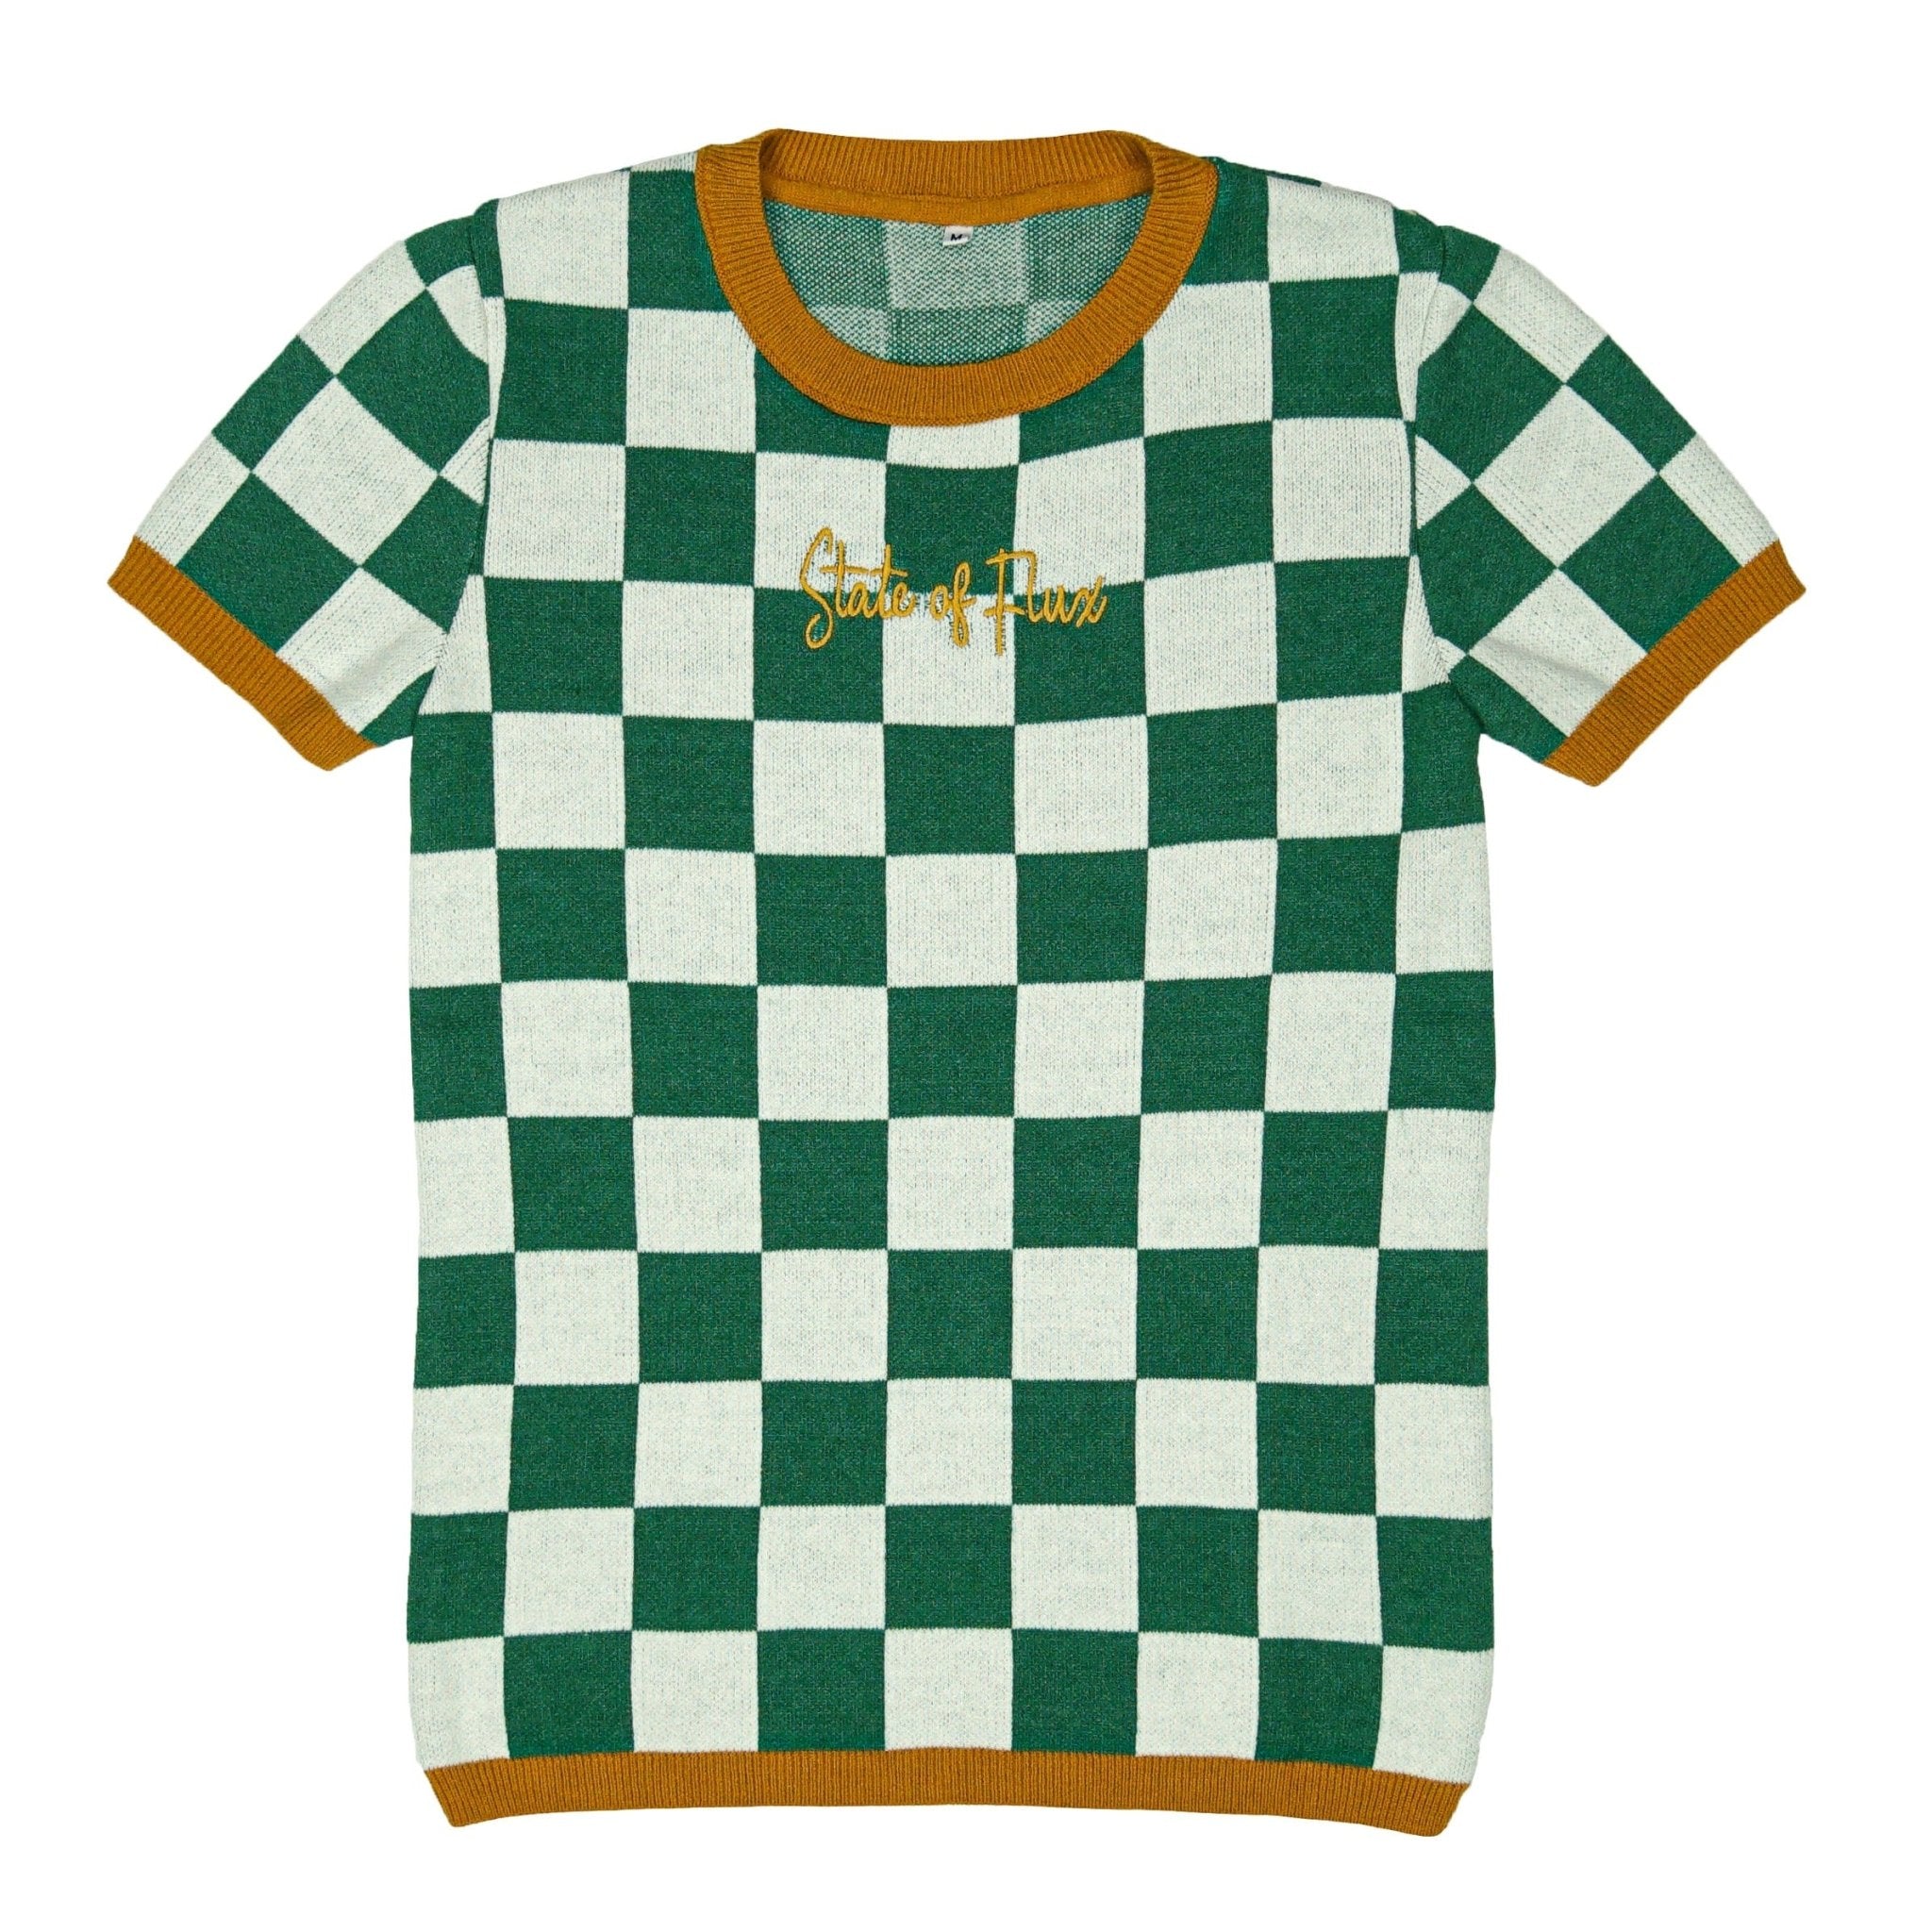 SOF Premium Checkerboard Knit Tee in green and white